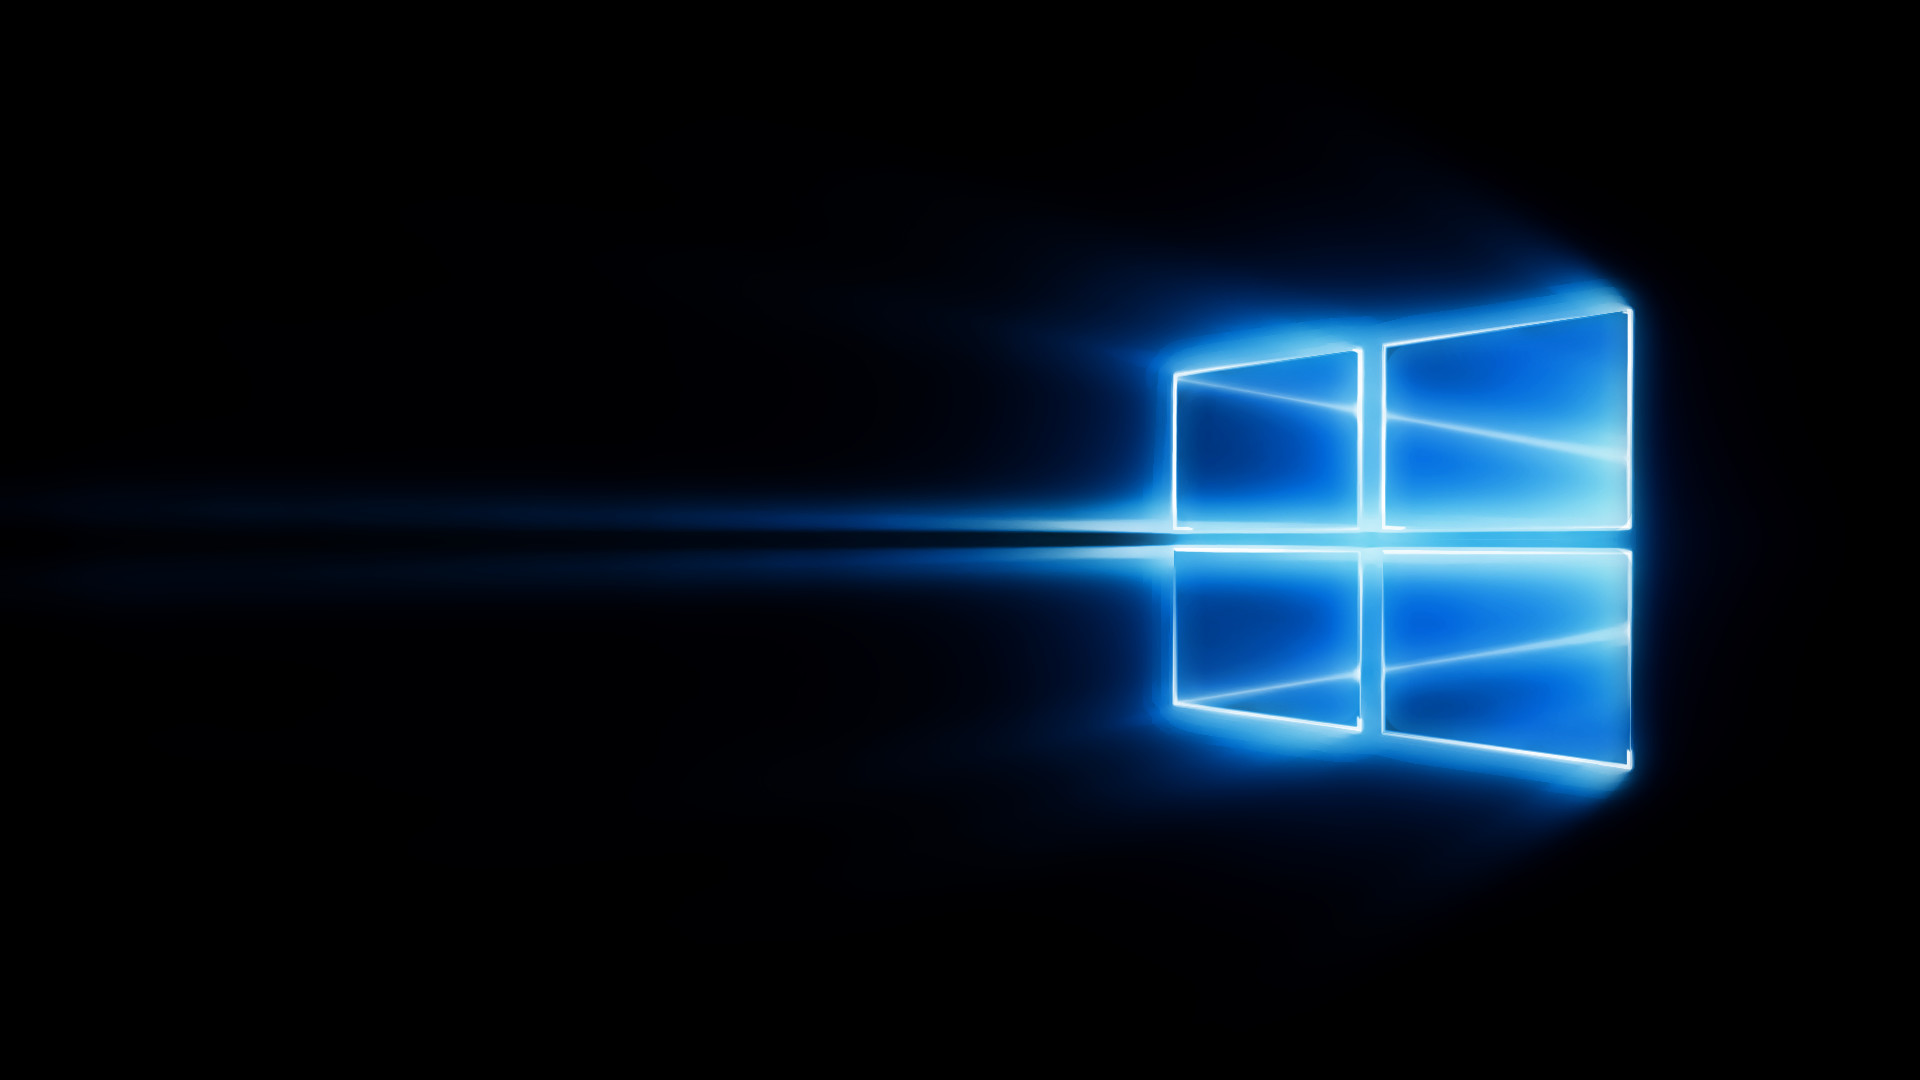 Windows 10 HD Wallpapers (74+ images) Full Hd Wallpapers For Windows 8 1920x1080